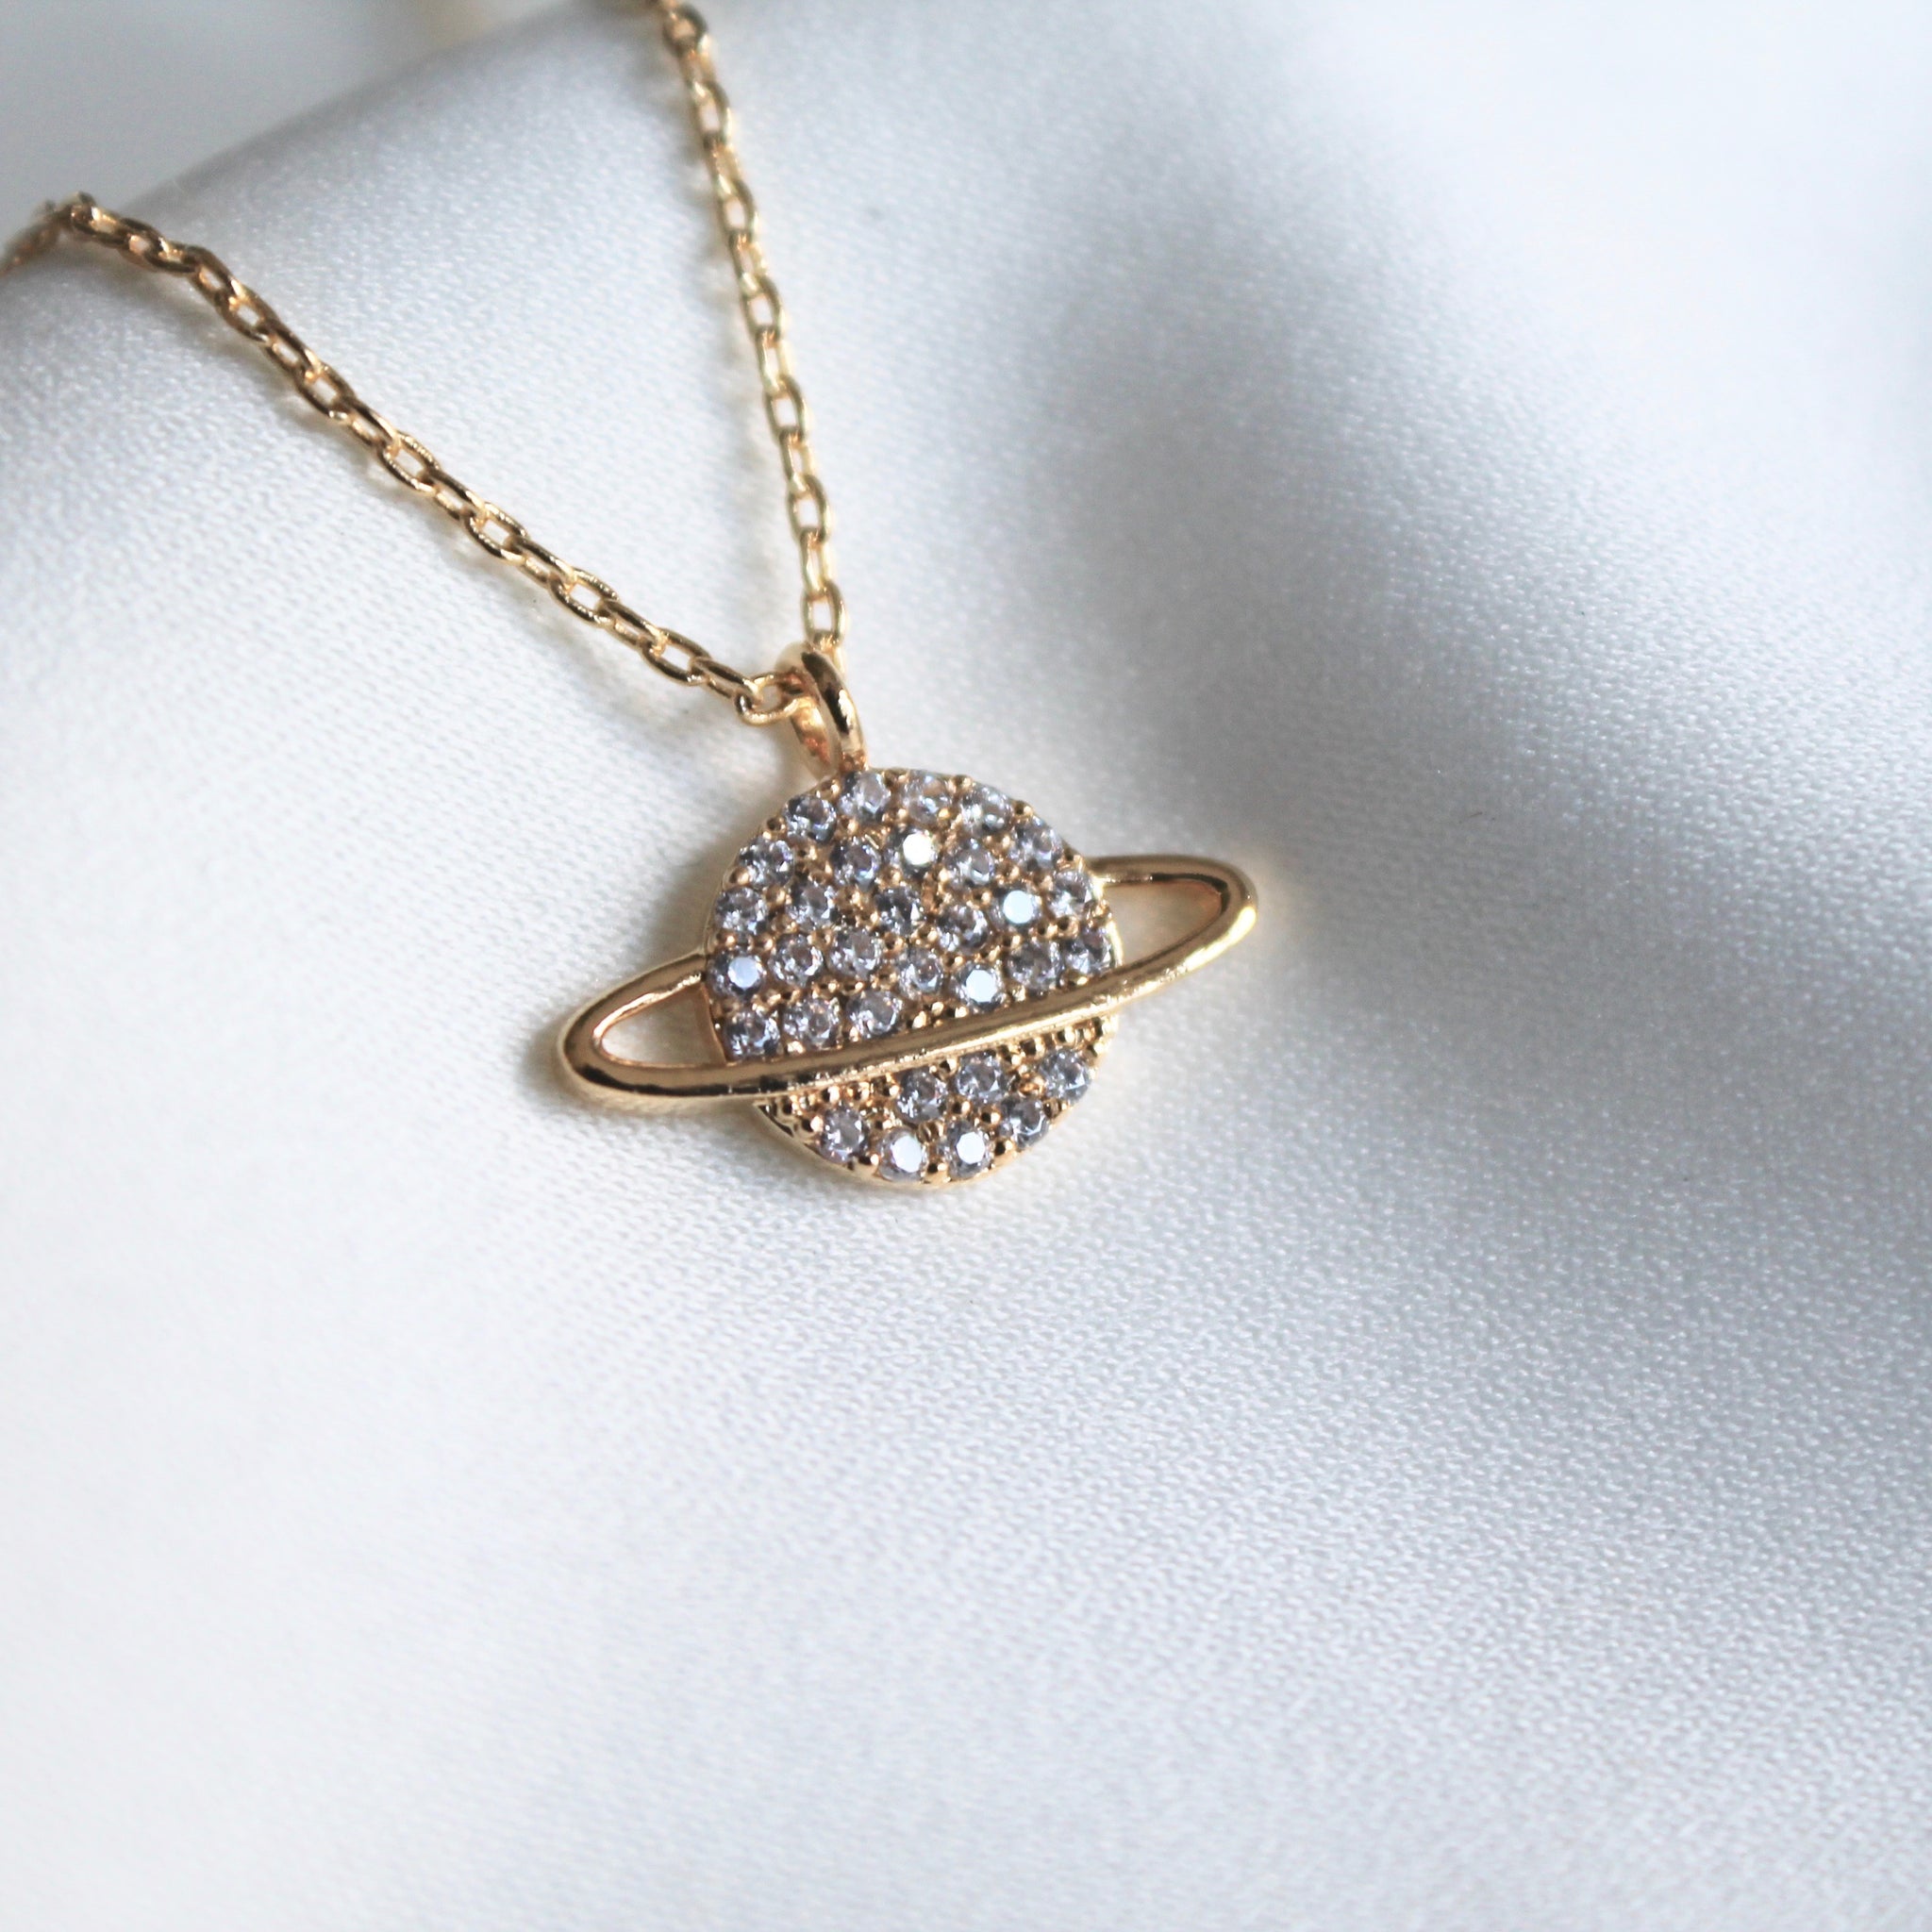 Saturn dainty necklace